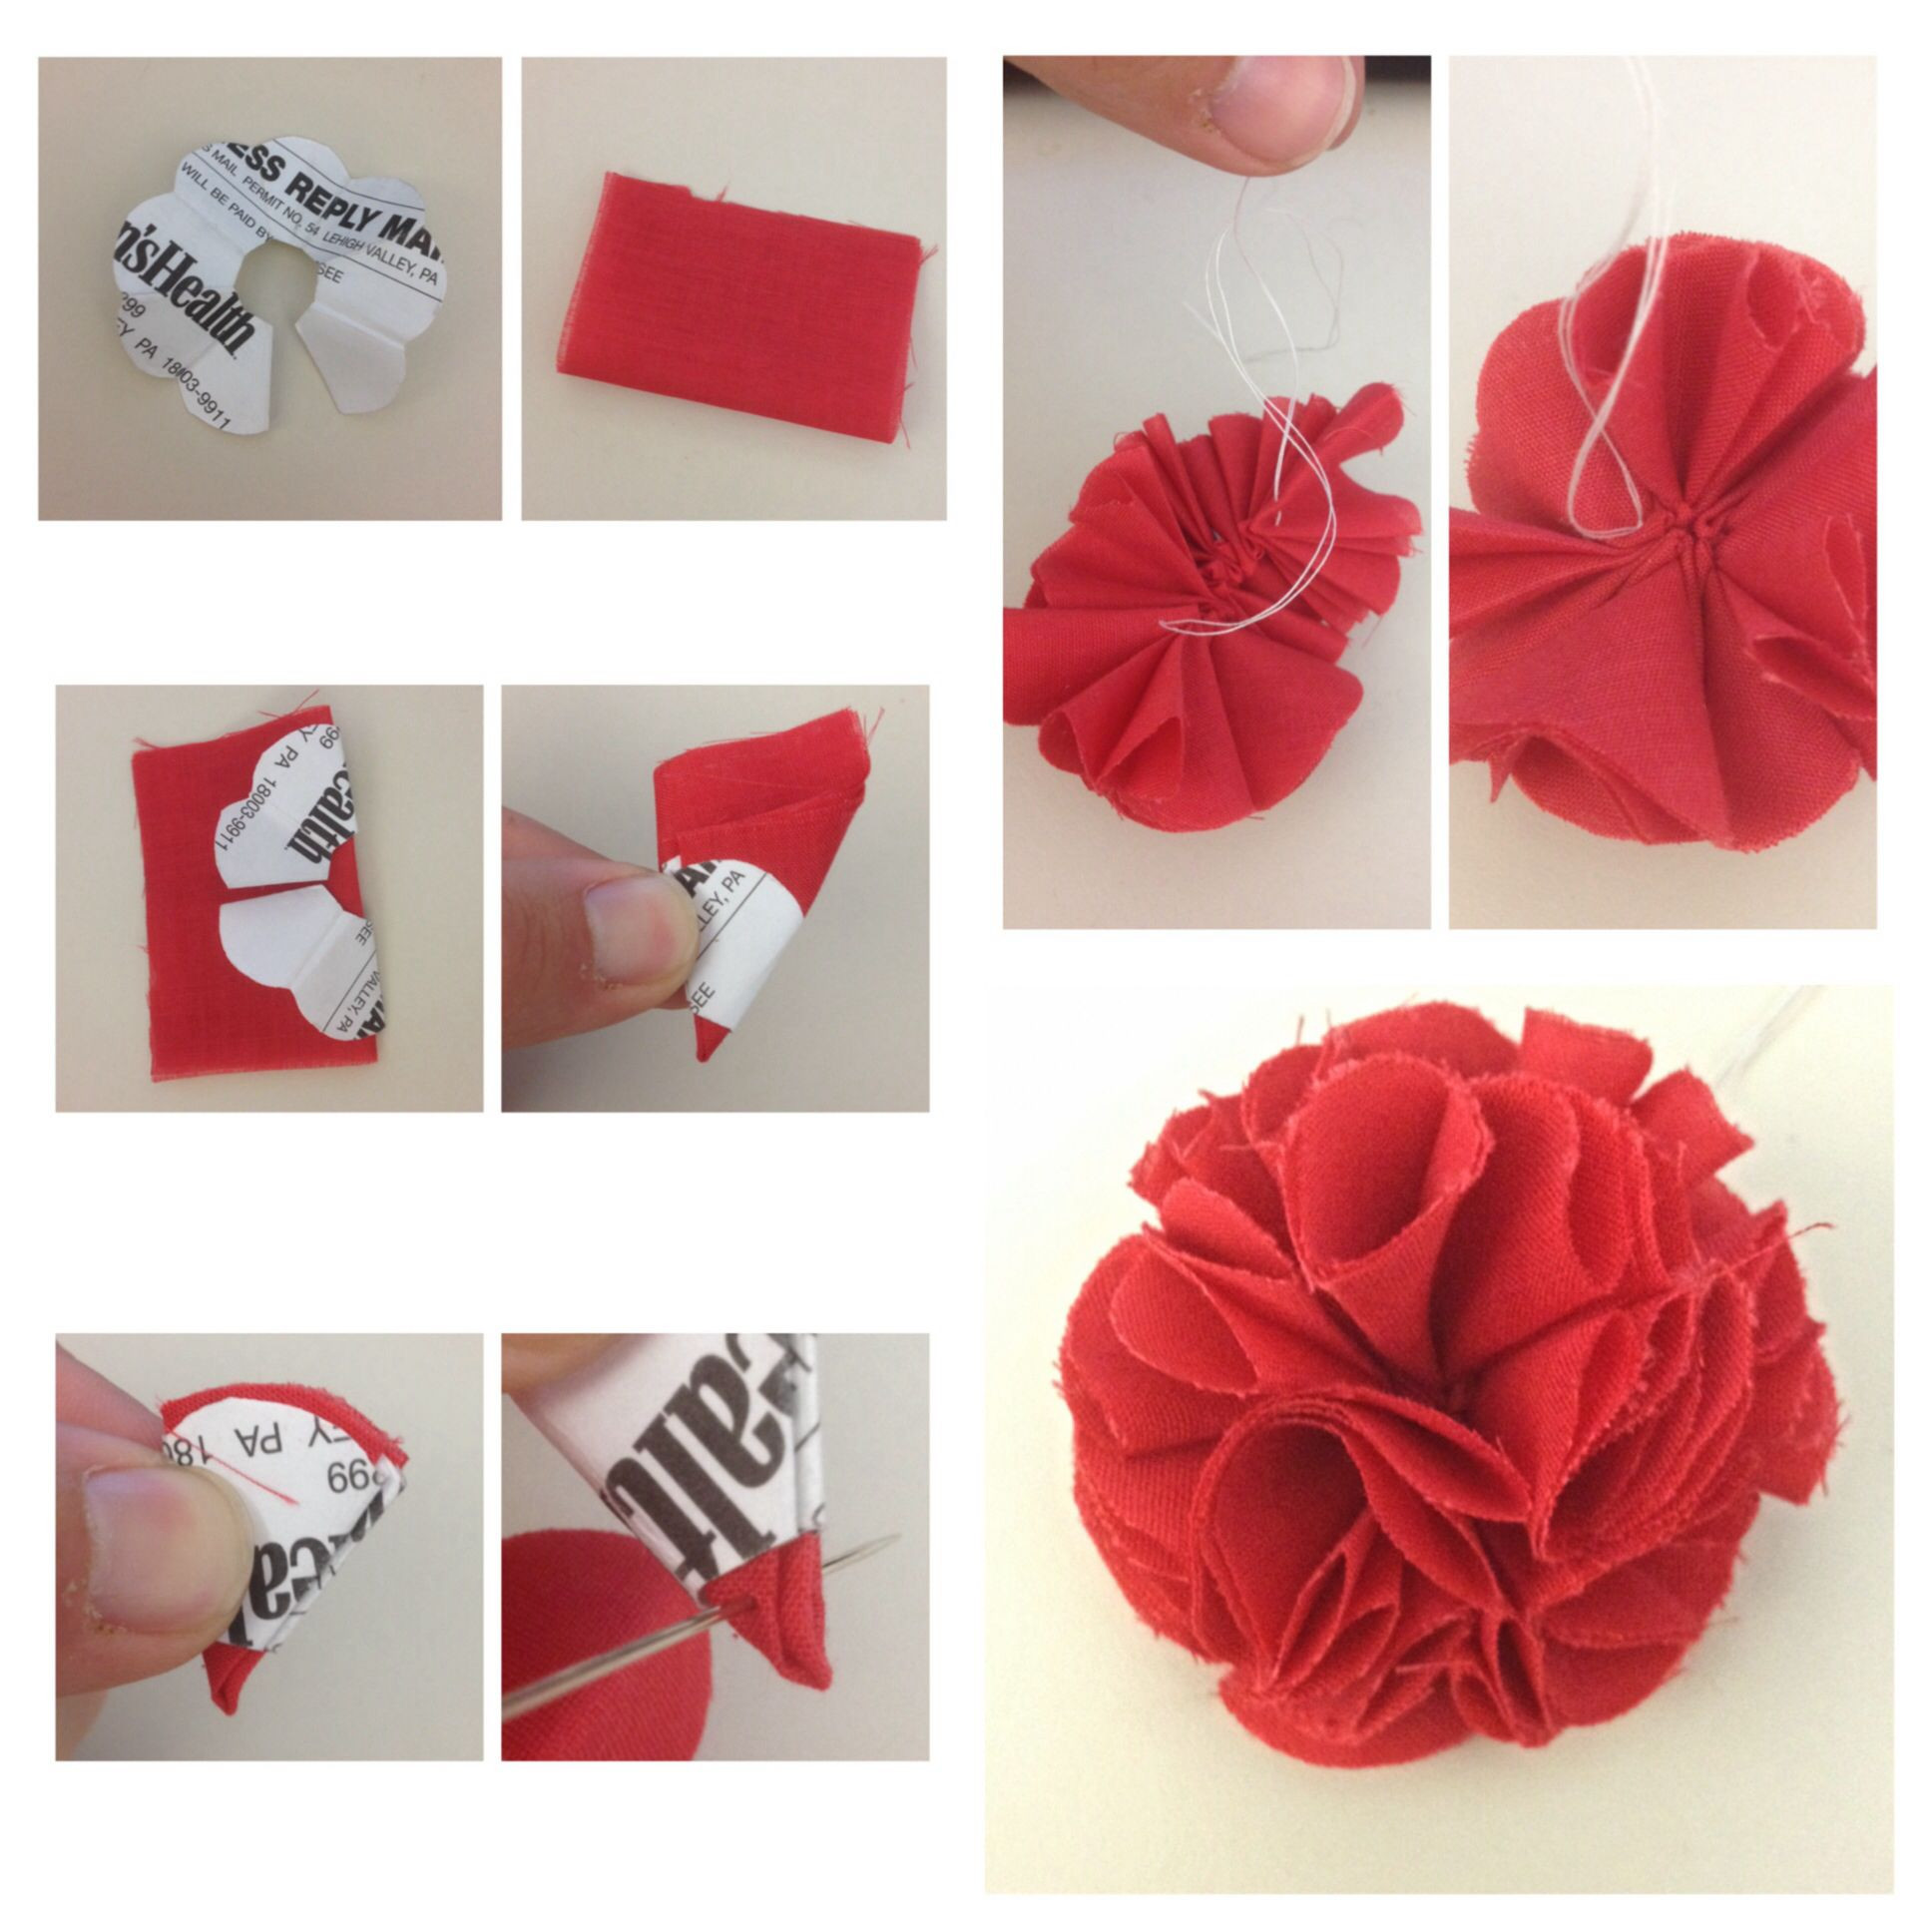 10 Lovable Lapel Pin Vase How to Use 2023 free download lapel pin vase how to use of made this flower lapel pin for my suits placed a small round red within made this flower lapel pin for my suits placed a small round red felt piece